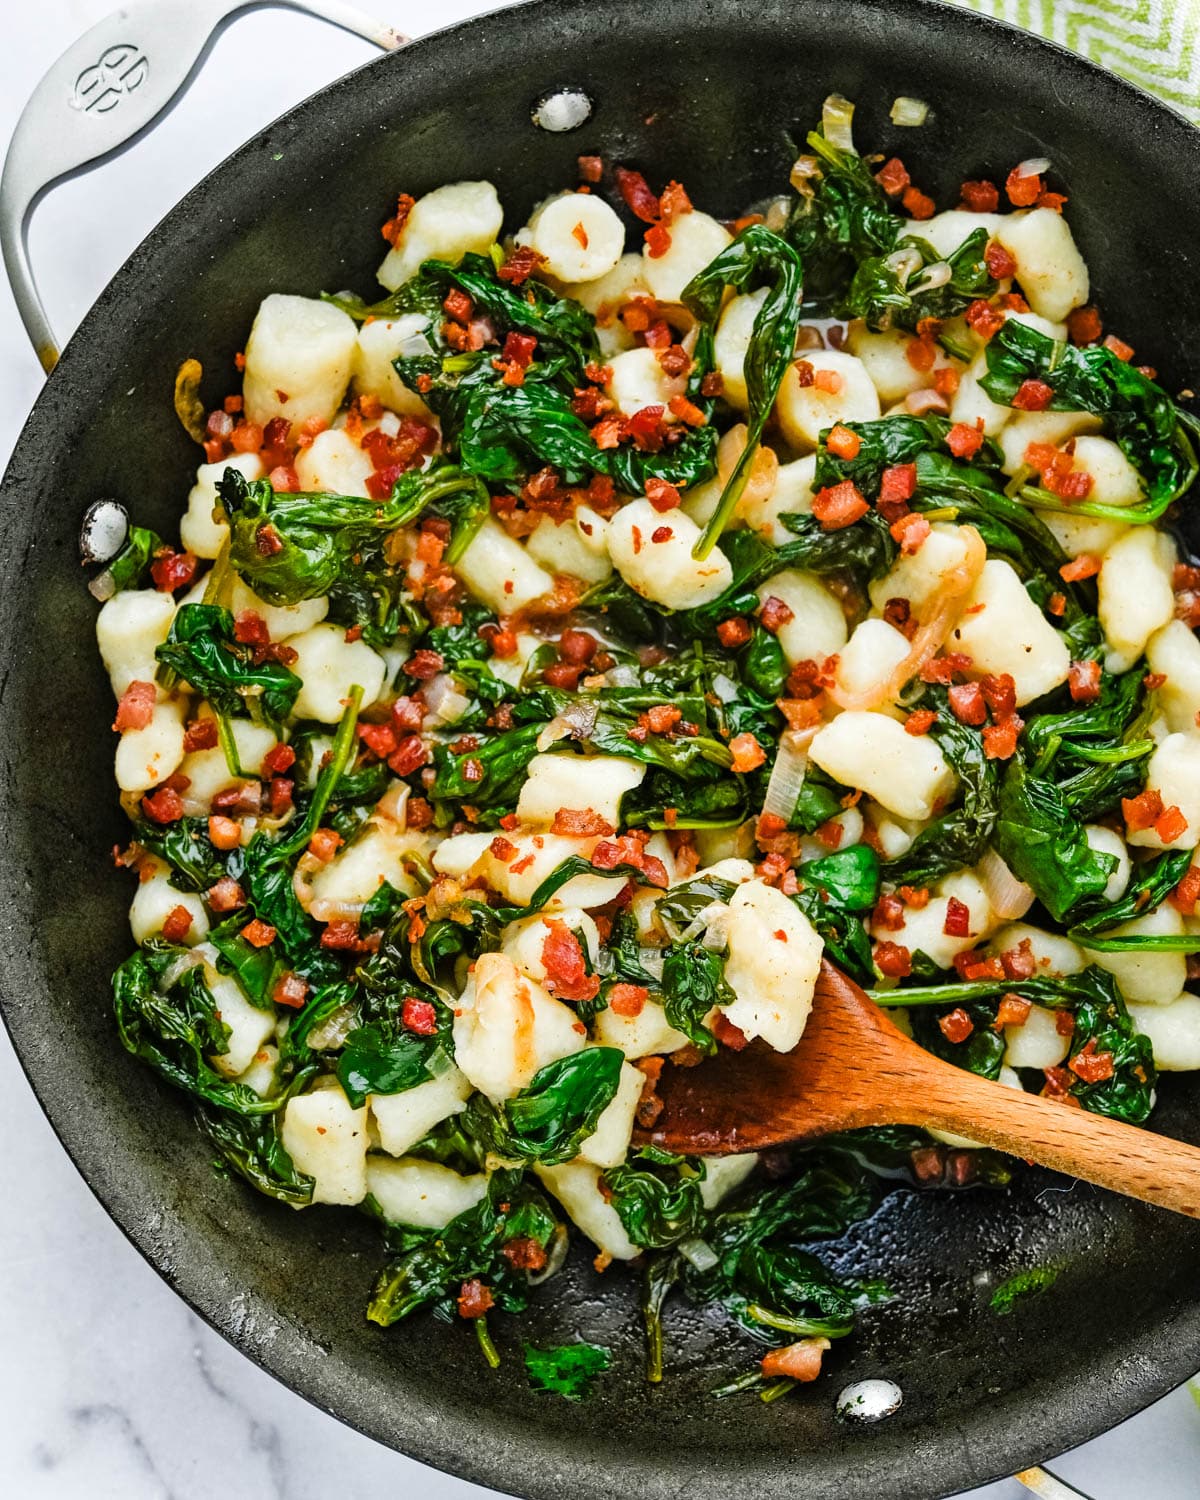 Pan-sauteed Italian gnocchi with pancetta and spinach.